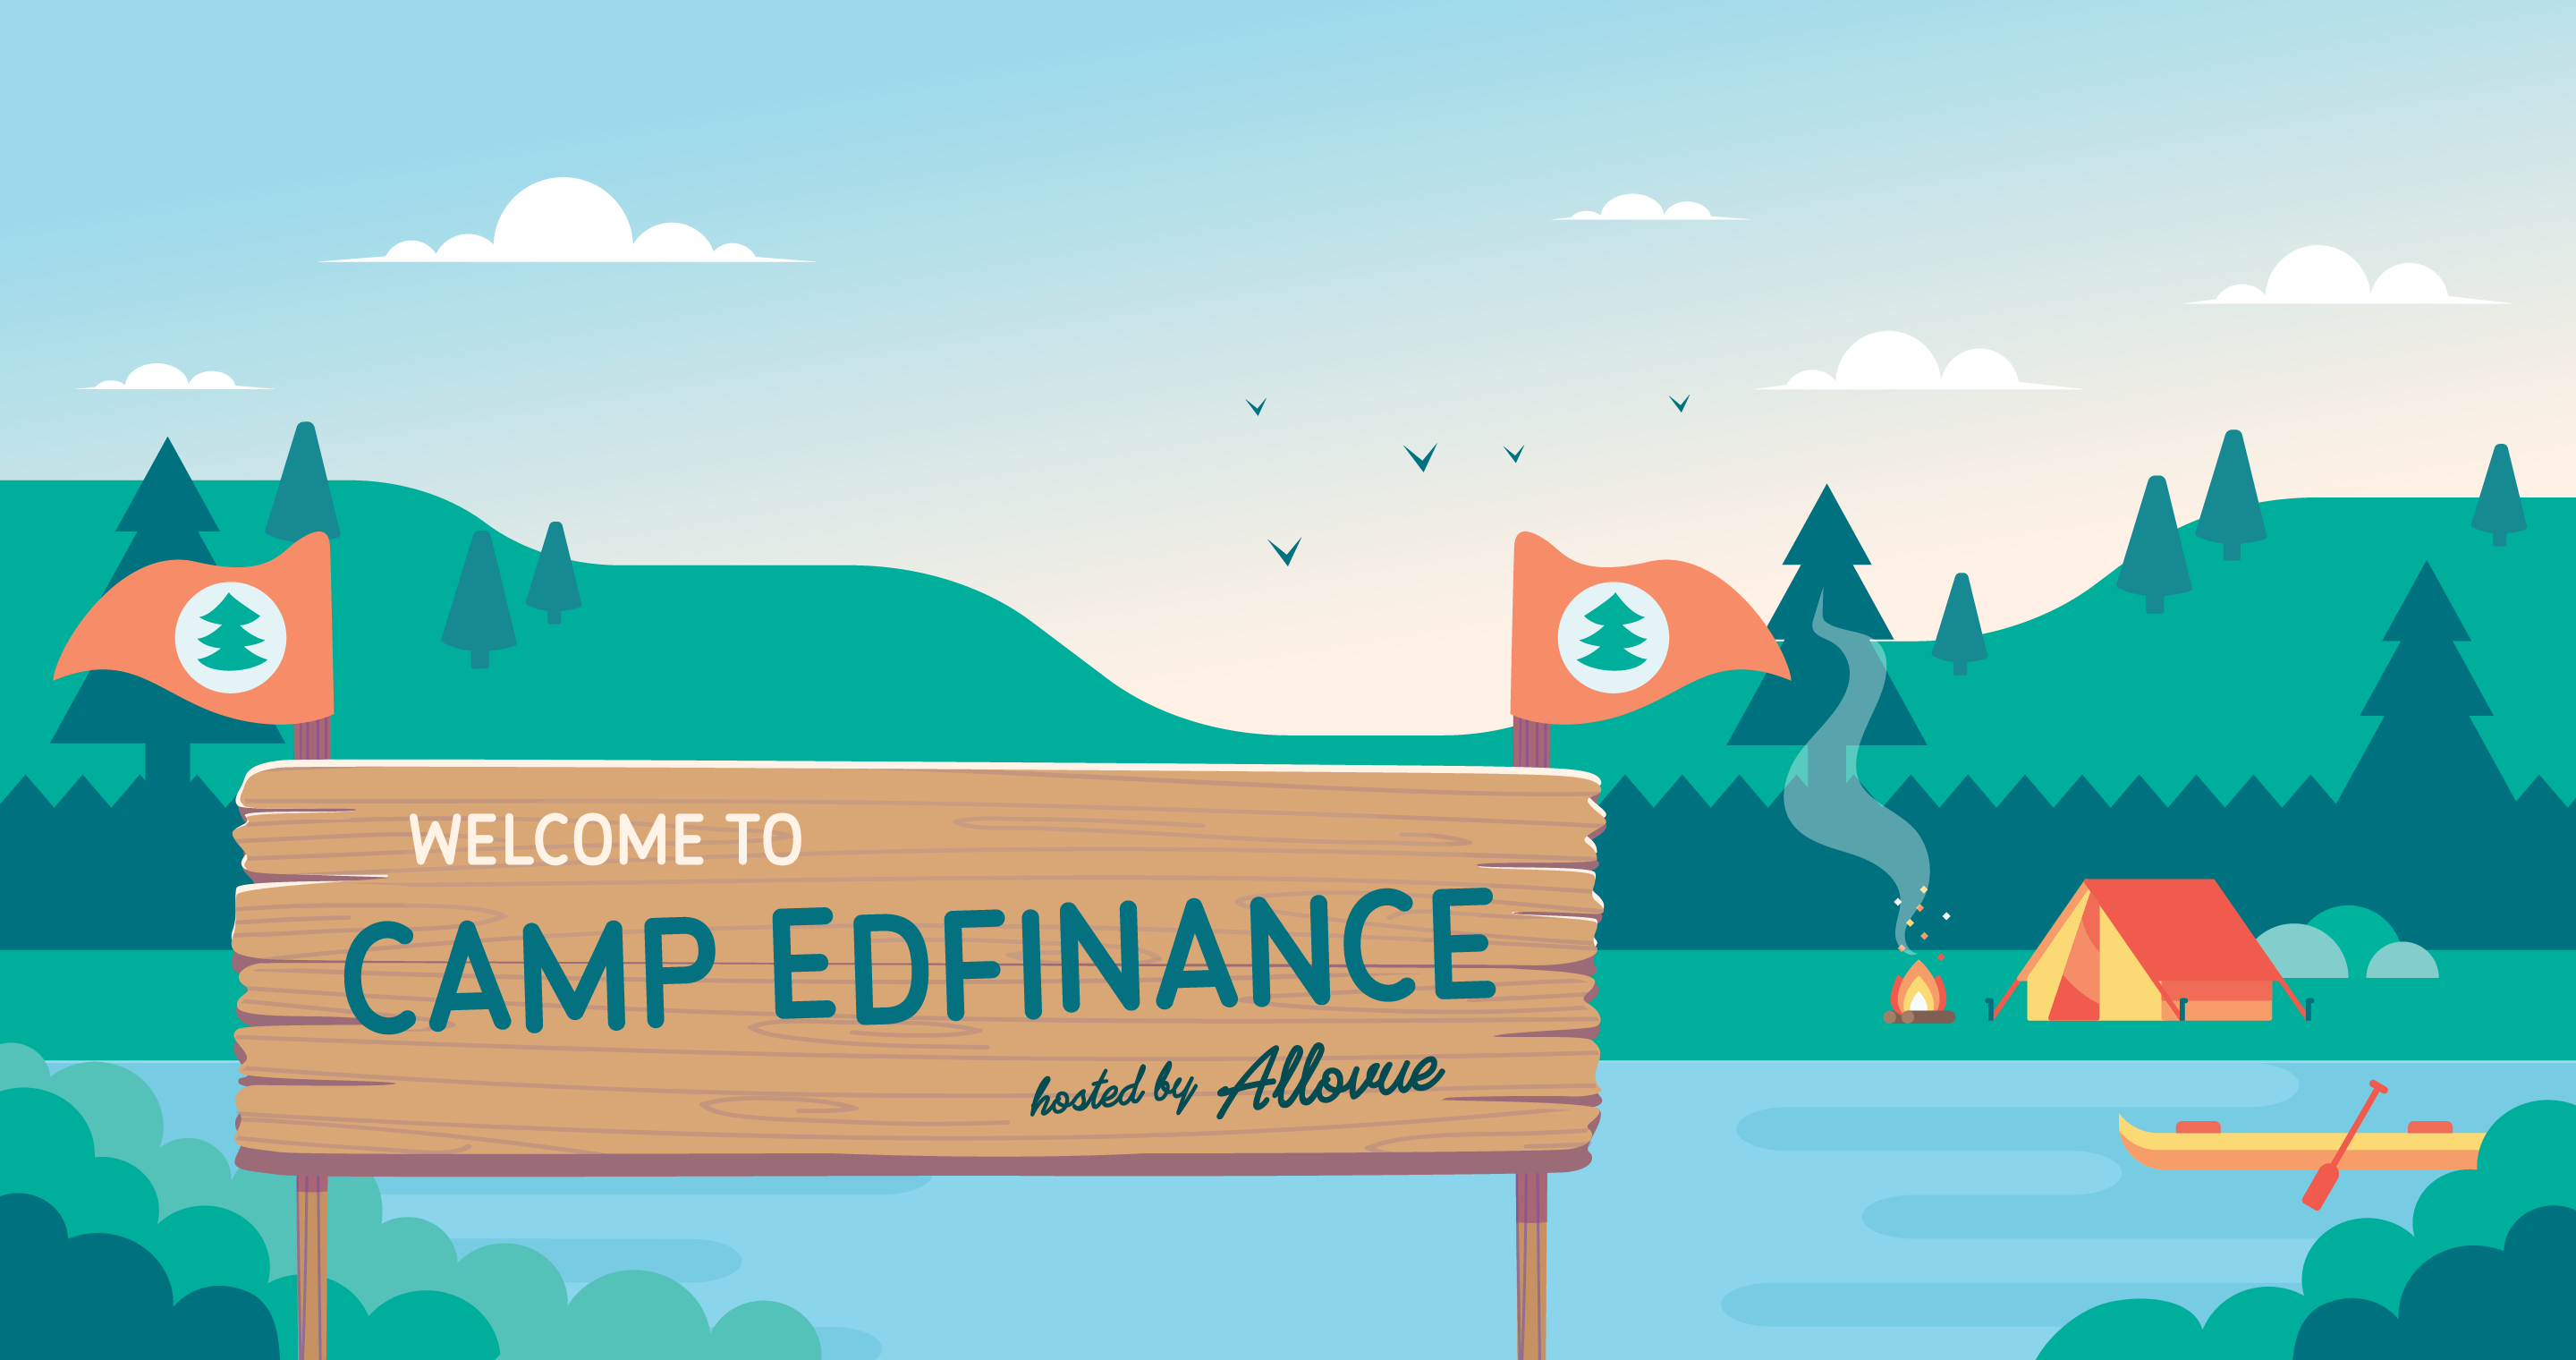 Vector illustration of a wooden plank sign reading "Welcome to Camp EdFinance hosted by Allovue." The sign's two posts each have a small orange flag with a pine tree in the center. Behind the sign is scenic view of a pond with a canoe, mountain range with dark teal pine trees, and a campsite with a blazing fire.